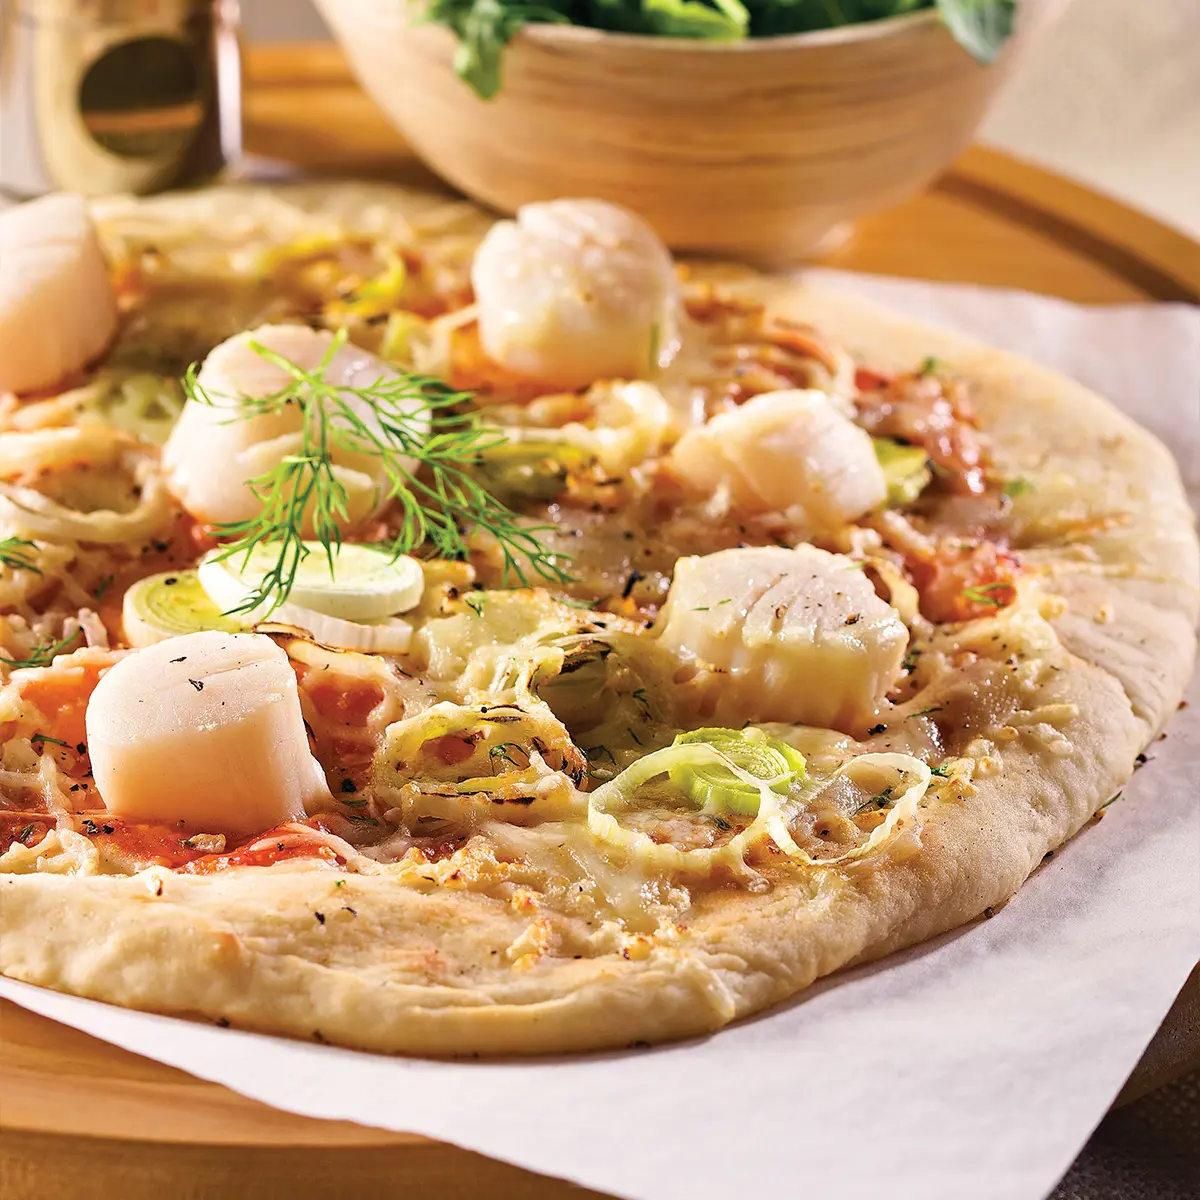 Scallops and leeks thin pizzas